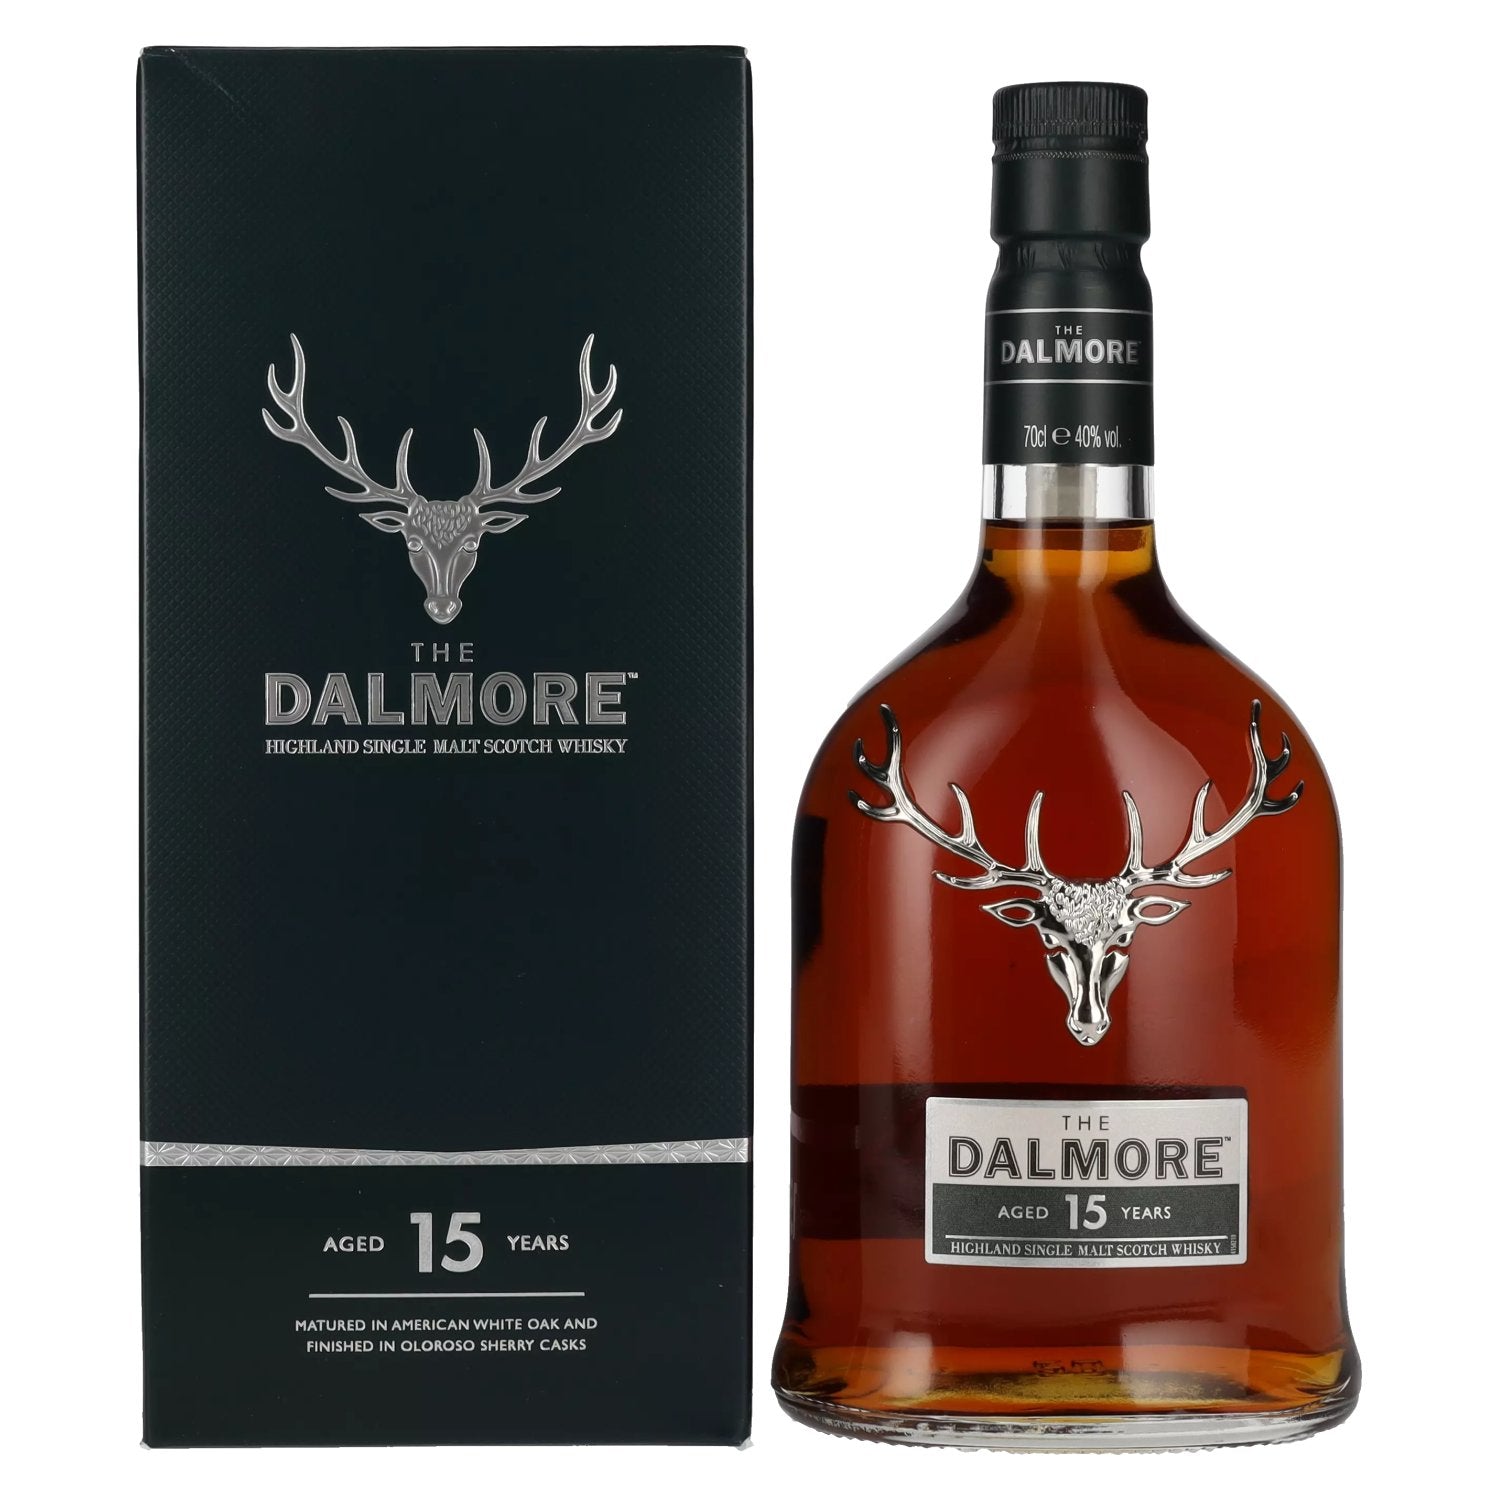 The Dalmore 15 Years Old Highland Single Malt Scotch Whisky 40% Vol. 0,7l in Giftbox